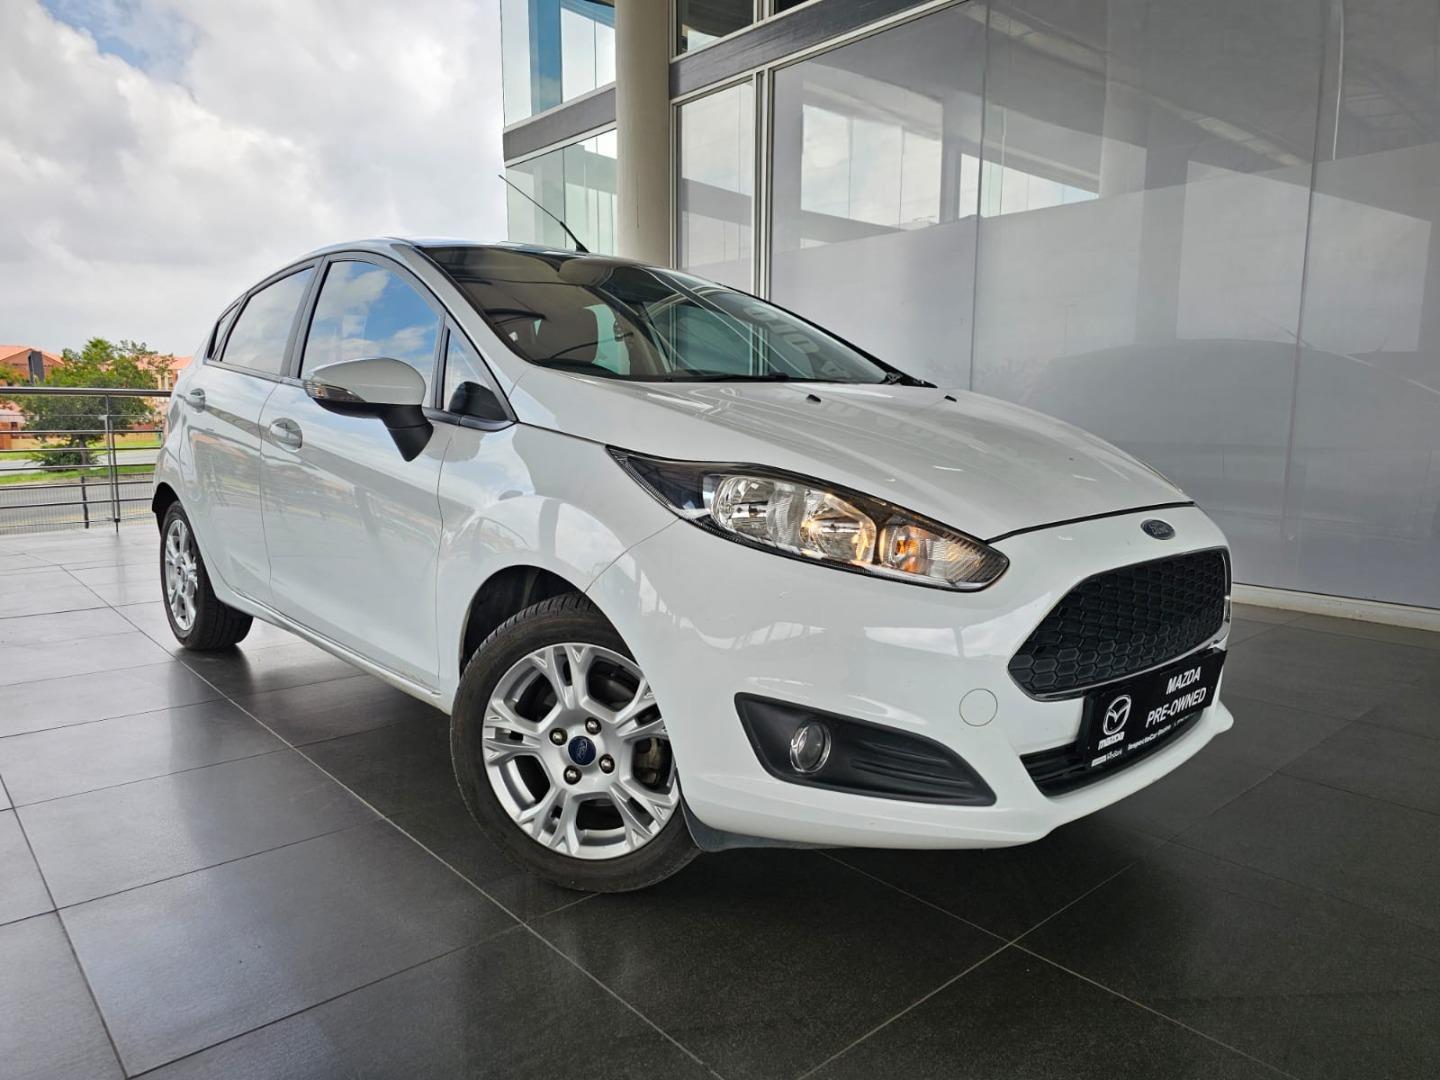 2017 Ford Fiesta  for sale - UC4419